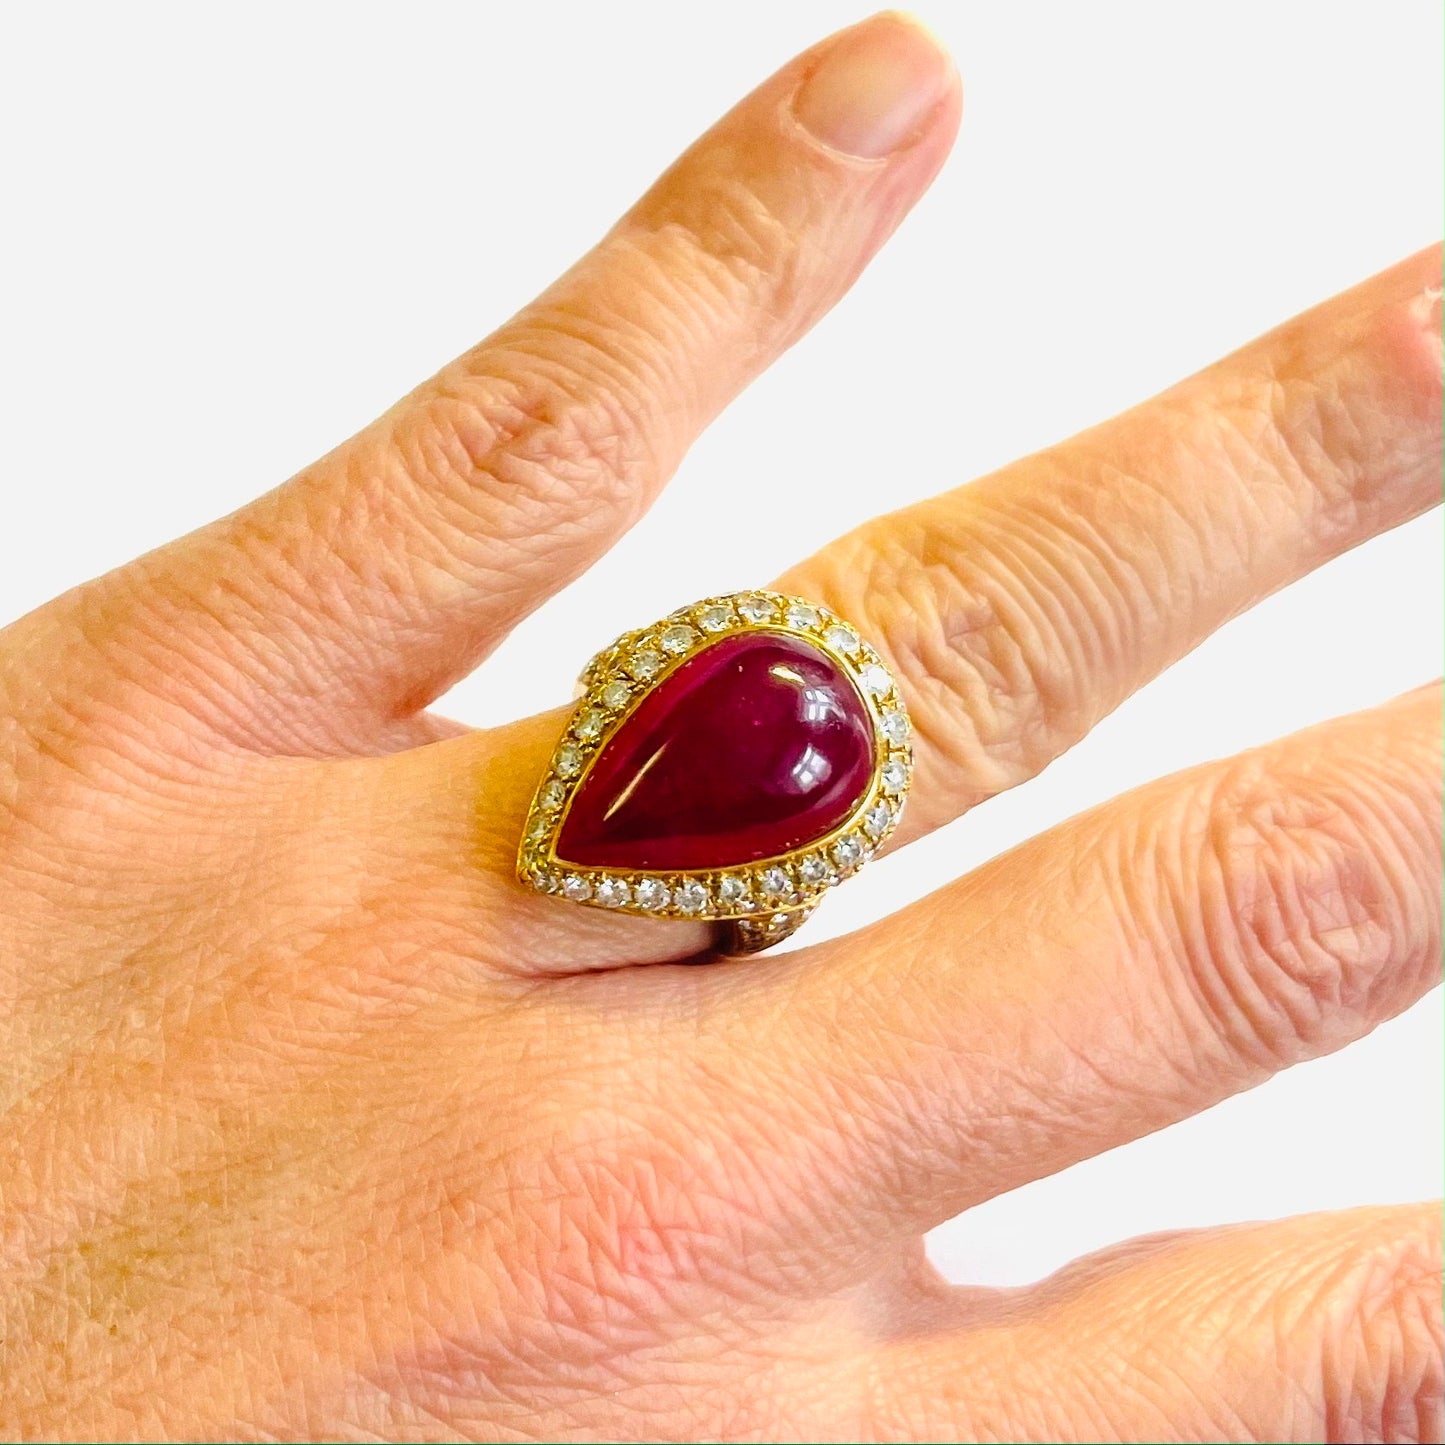 Hemmerle 1980s Platinum & 18KT Yellow Gold African Unheated Ruby & Diamond Ring on finger